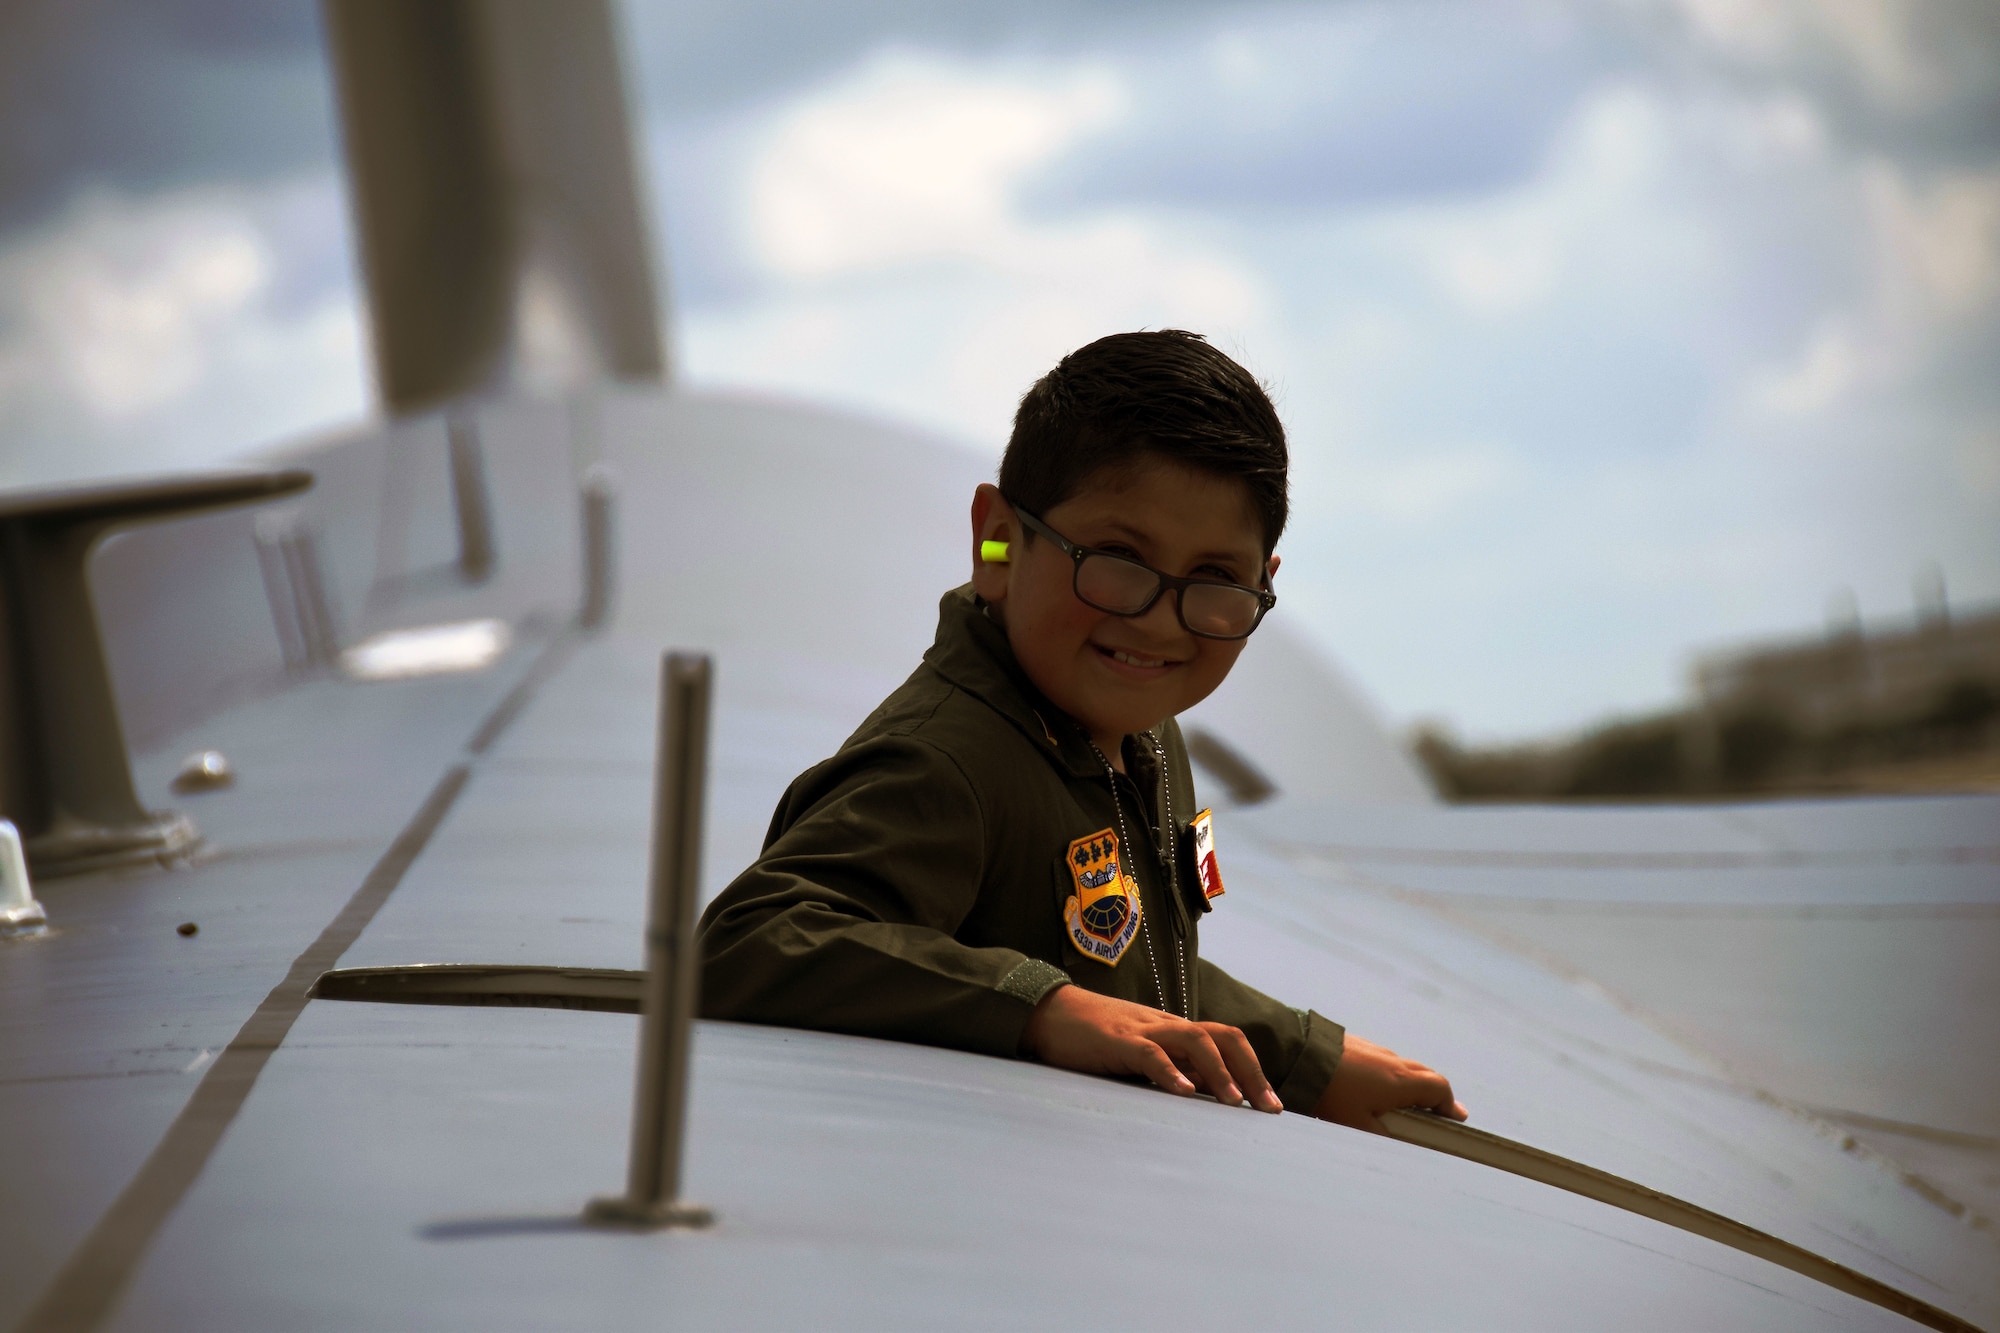 The 433rd Airlift Wing hosted 8-year-old Giovanny Gallegos, who is battling high risk leukemia, as the Pilot for a Day Sept. 8, 2018 at Joint Base San Antonio-Lackland.